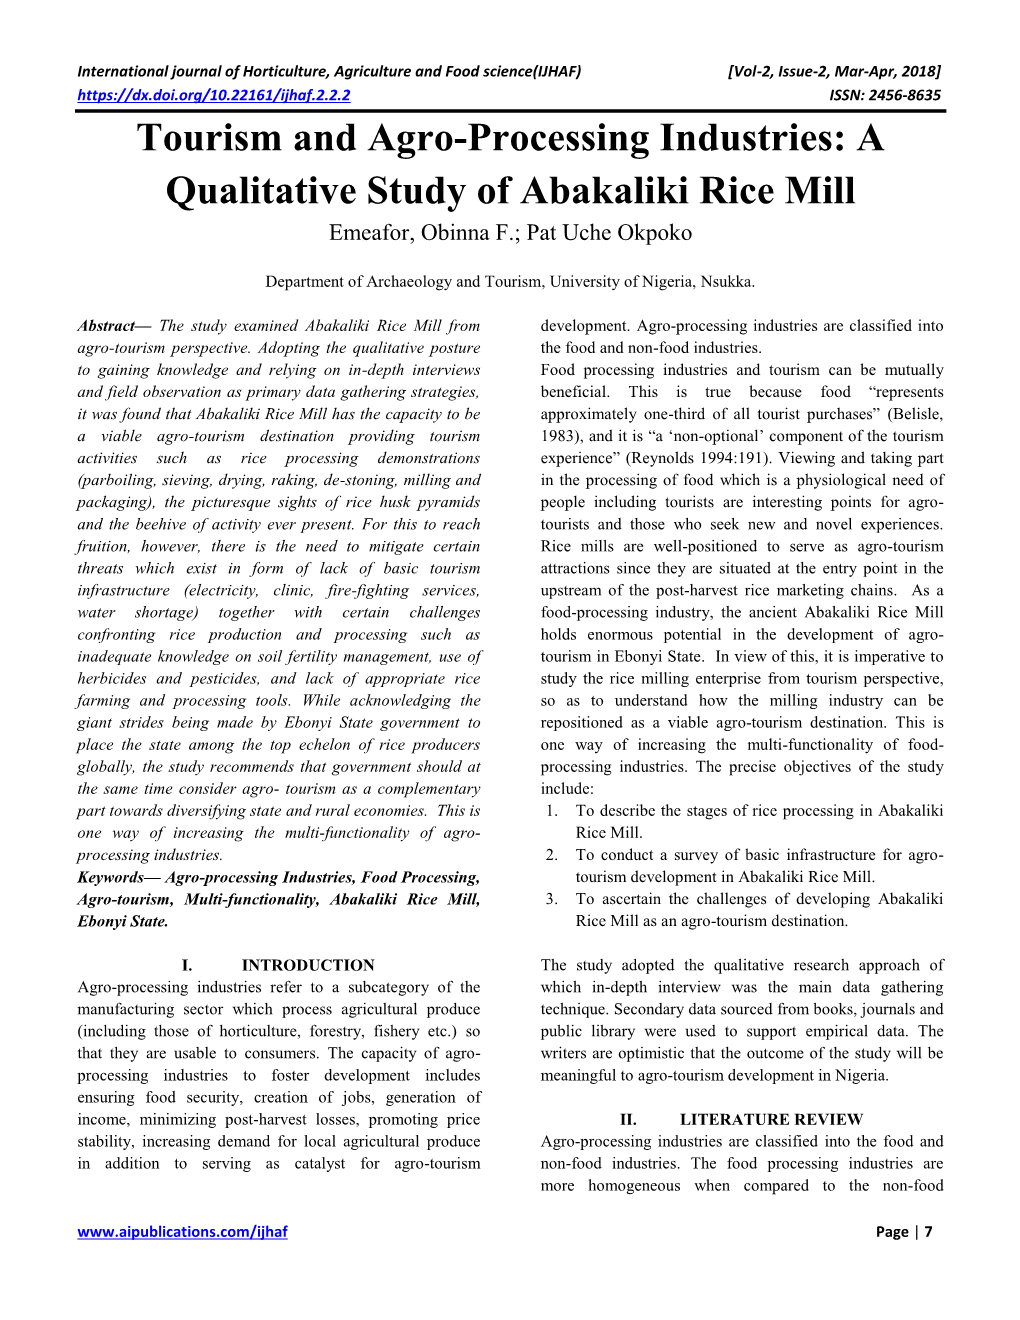 Tourism and Agro-Processing Industries: a Qualitative Study of Abakaliki Rice Mill Emeafor, Obinna F.; Pat Uche Okpoko